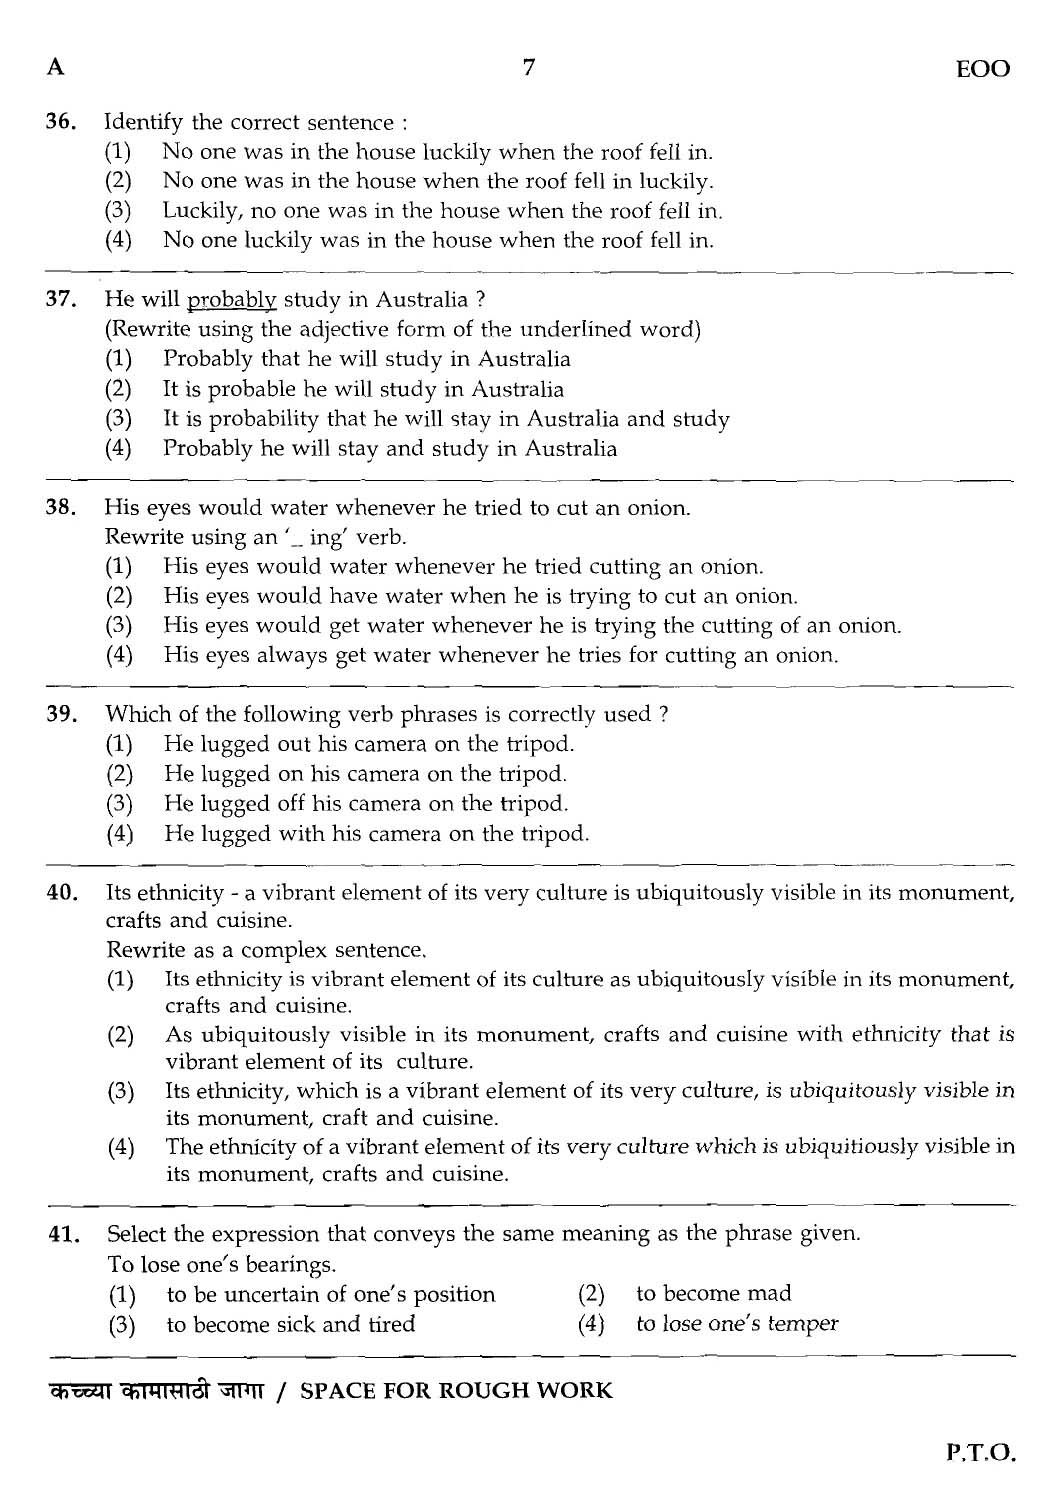 MPSC Agricultural Services Preliminary Exam 2012 Question Paper 6